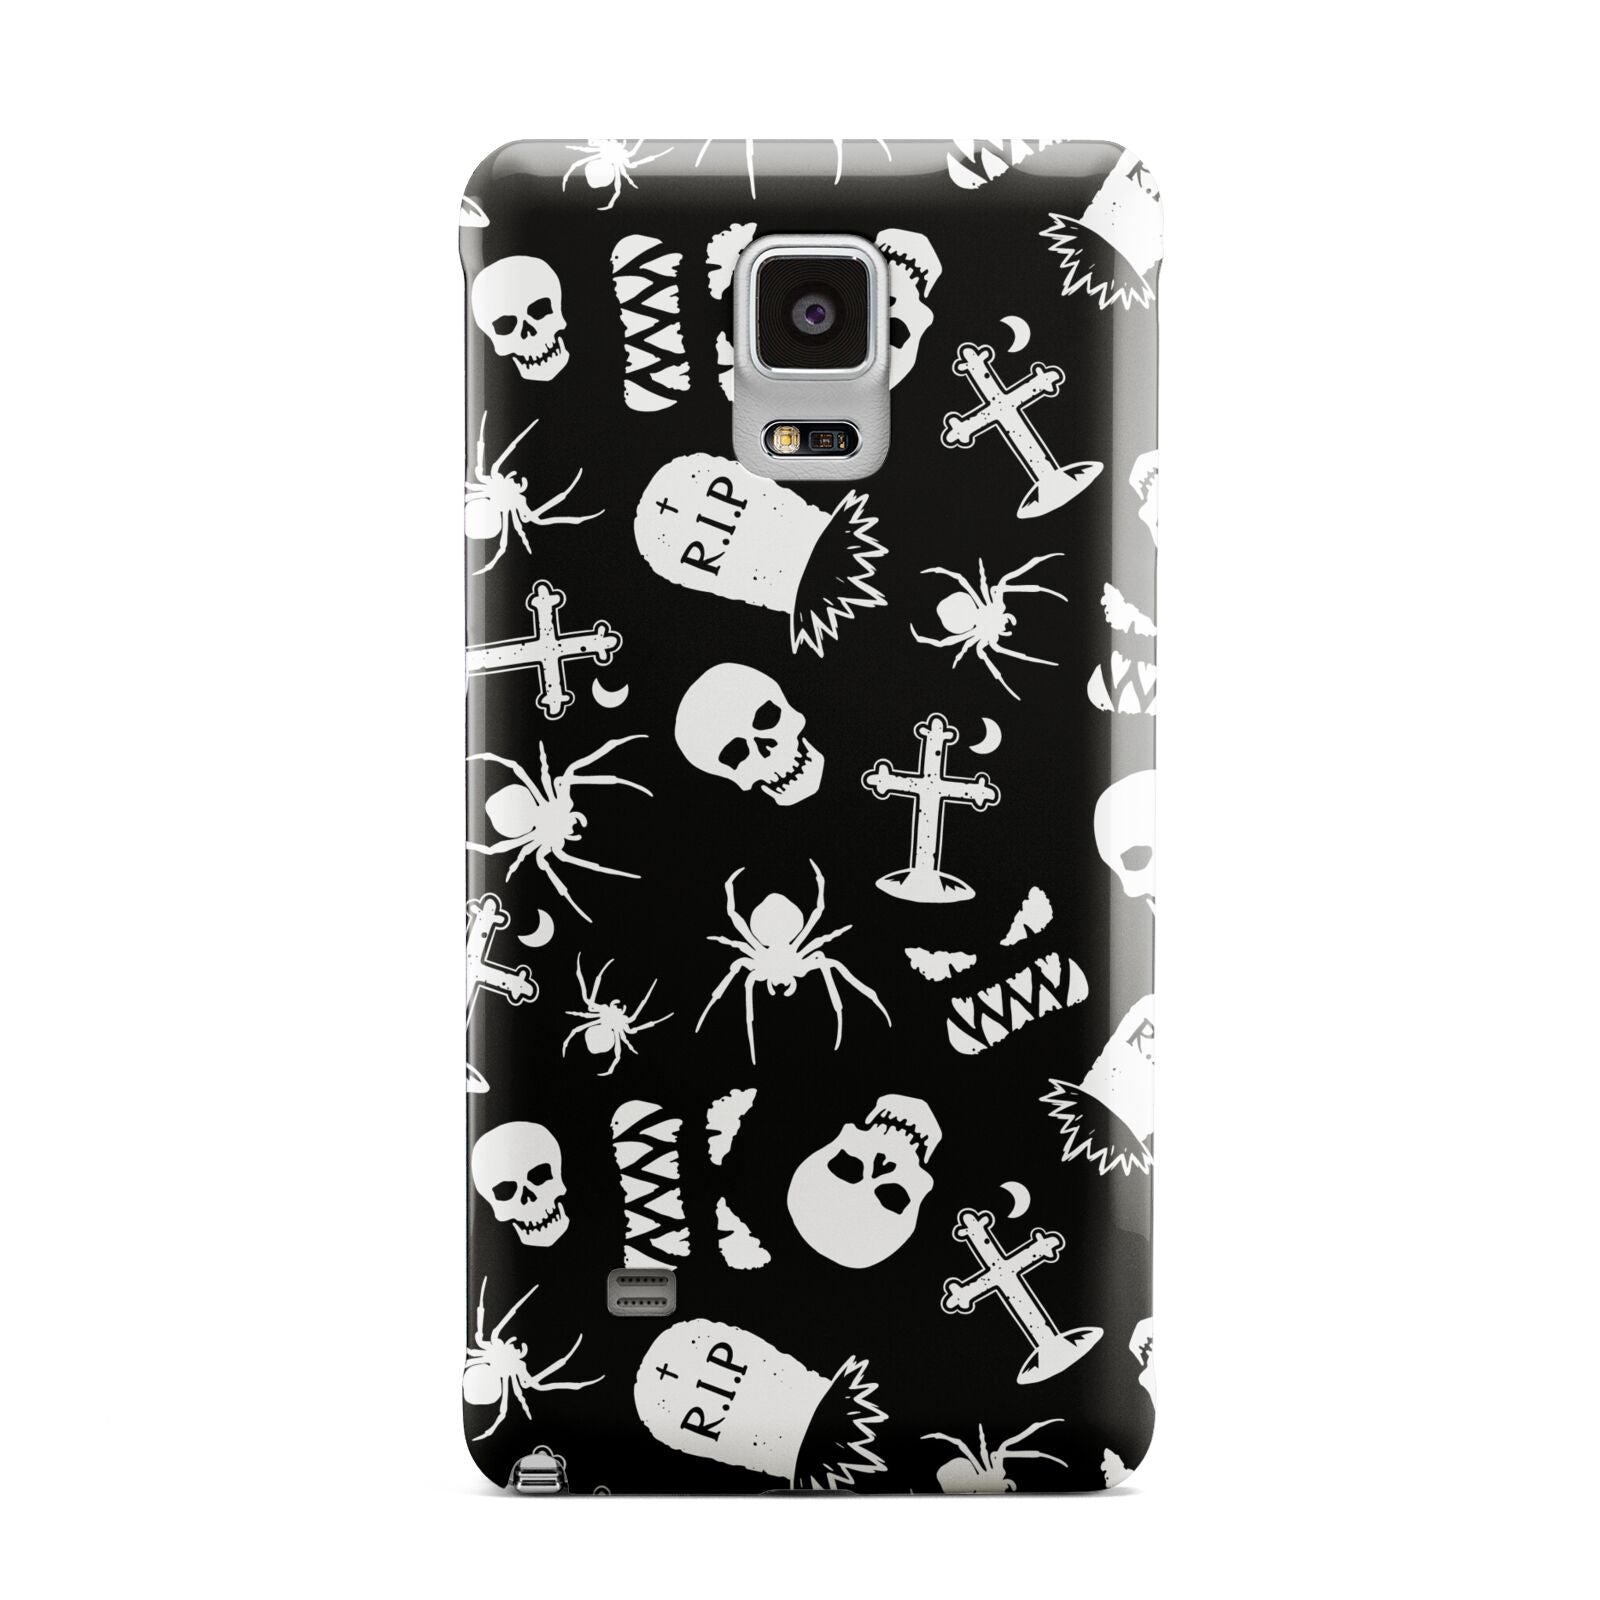 Spooky Illustrations Samsung Galaxy Note 4 Case